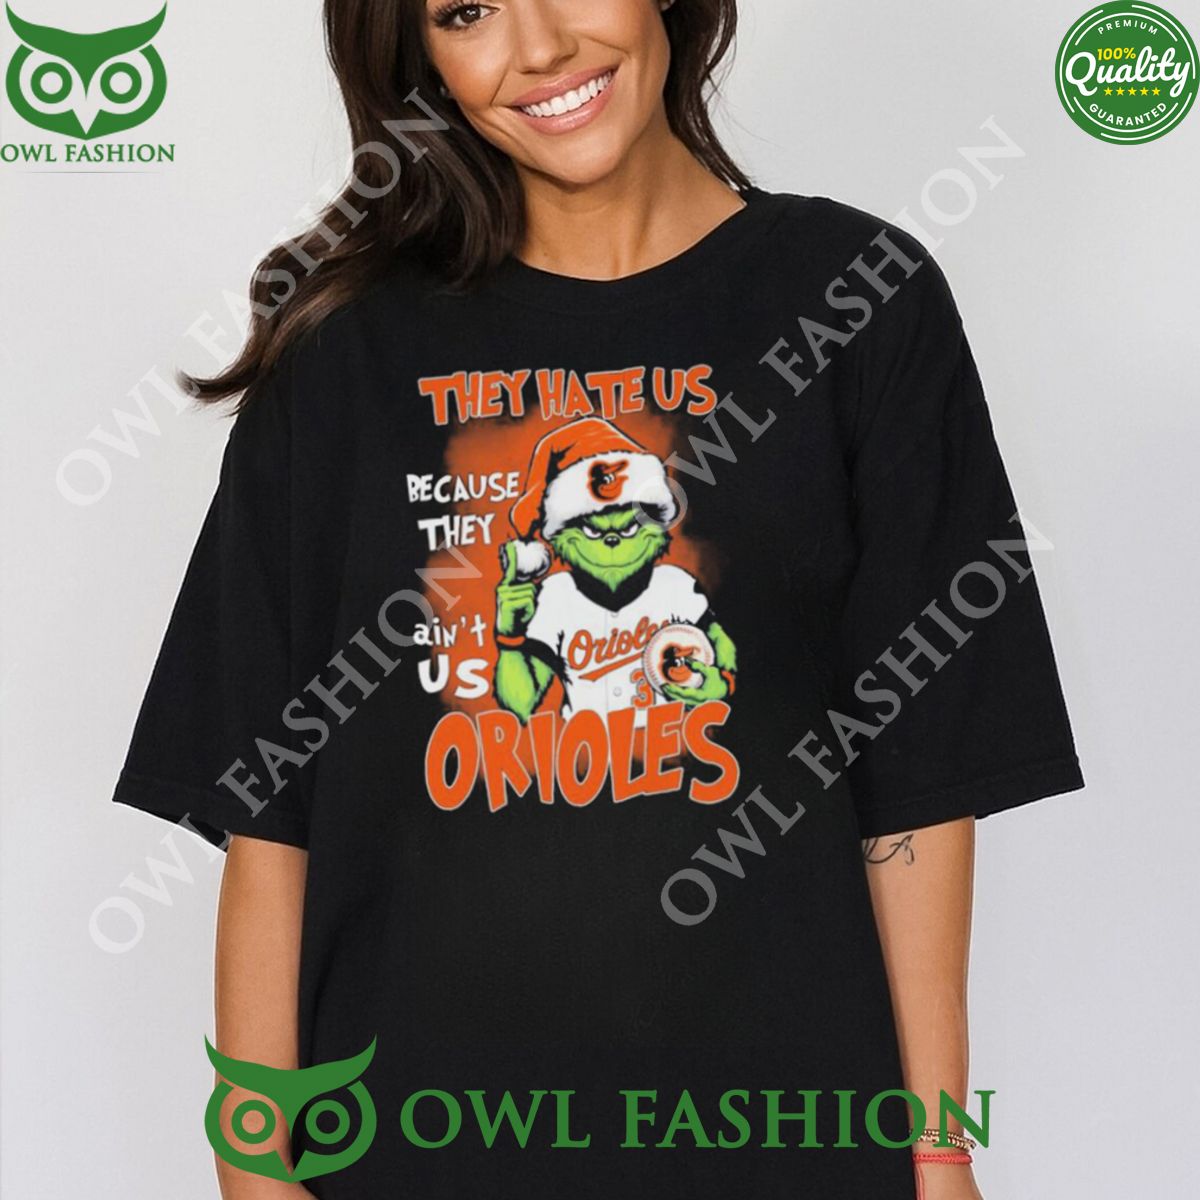 they hate us because aint us orioles santa grinch christmas t shirt 1 RZPZn.jpg